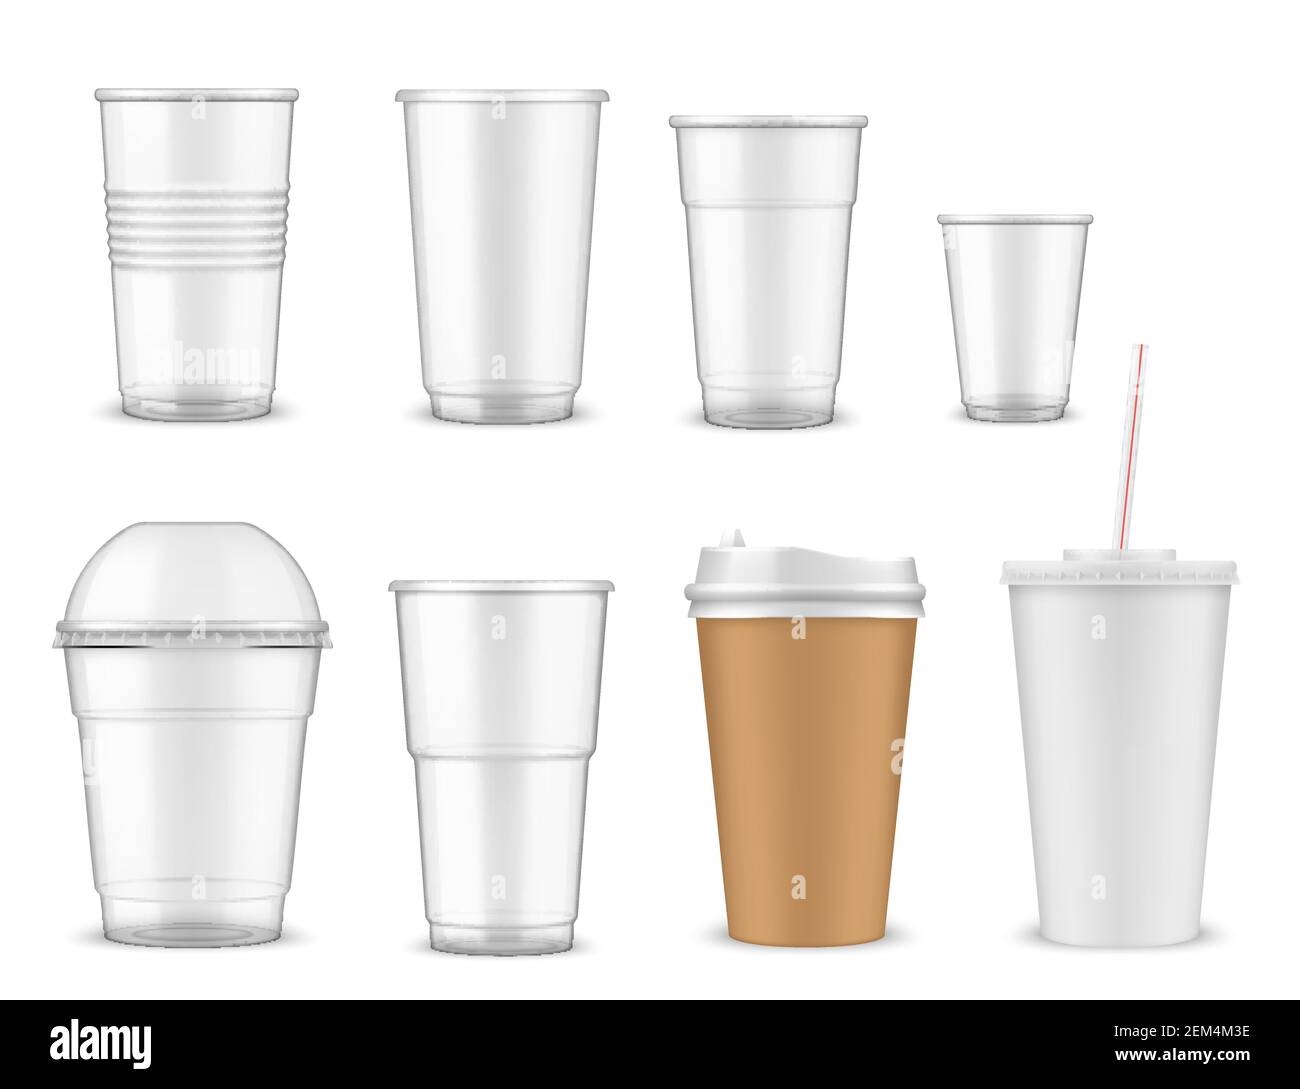 https://c8.alamy.com/comp/2EM4M3E/cup-vector-mockups-with-3d-plastic-and-paper-mugs-of-hot-coffee-drinks-and-cold-juice-beverages-empty-disposable-containers-of-takeaway-tea-milk-and-2EM4M3E.jpg